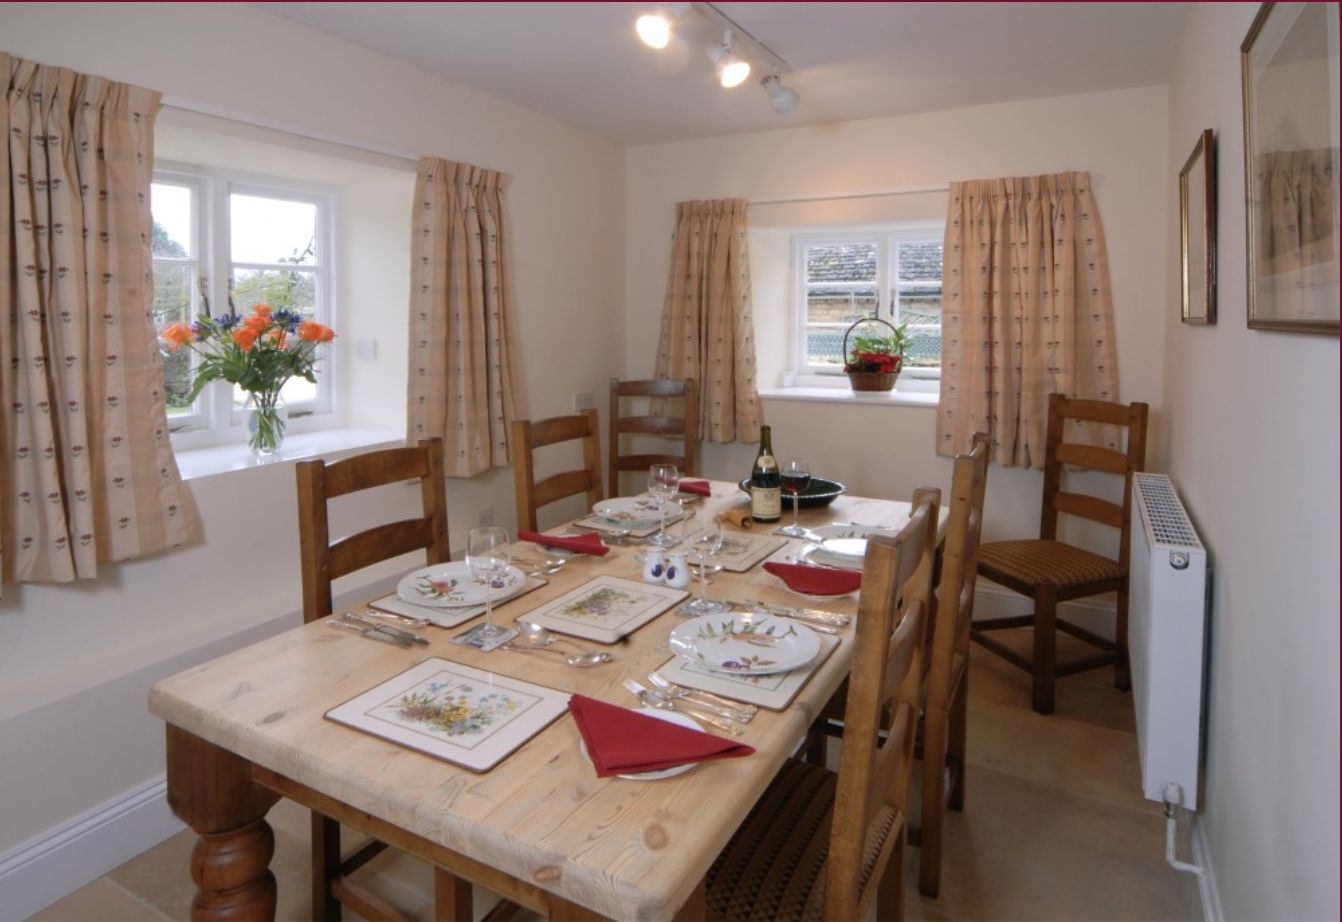 Berry Cottage is Available for Short and Mid-Term Holiday Rental